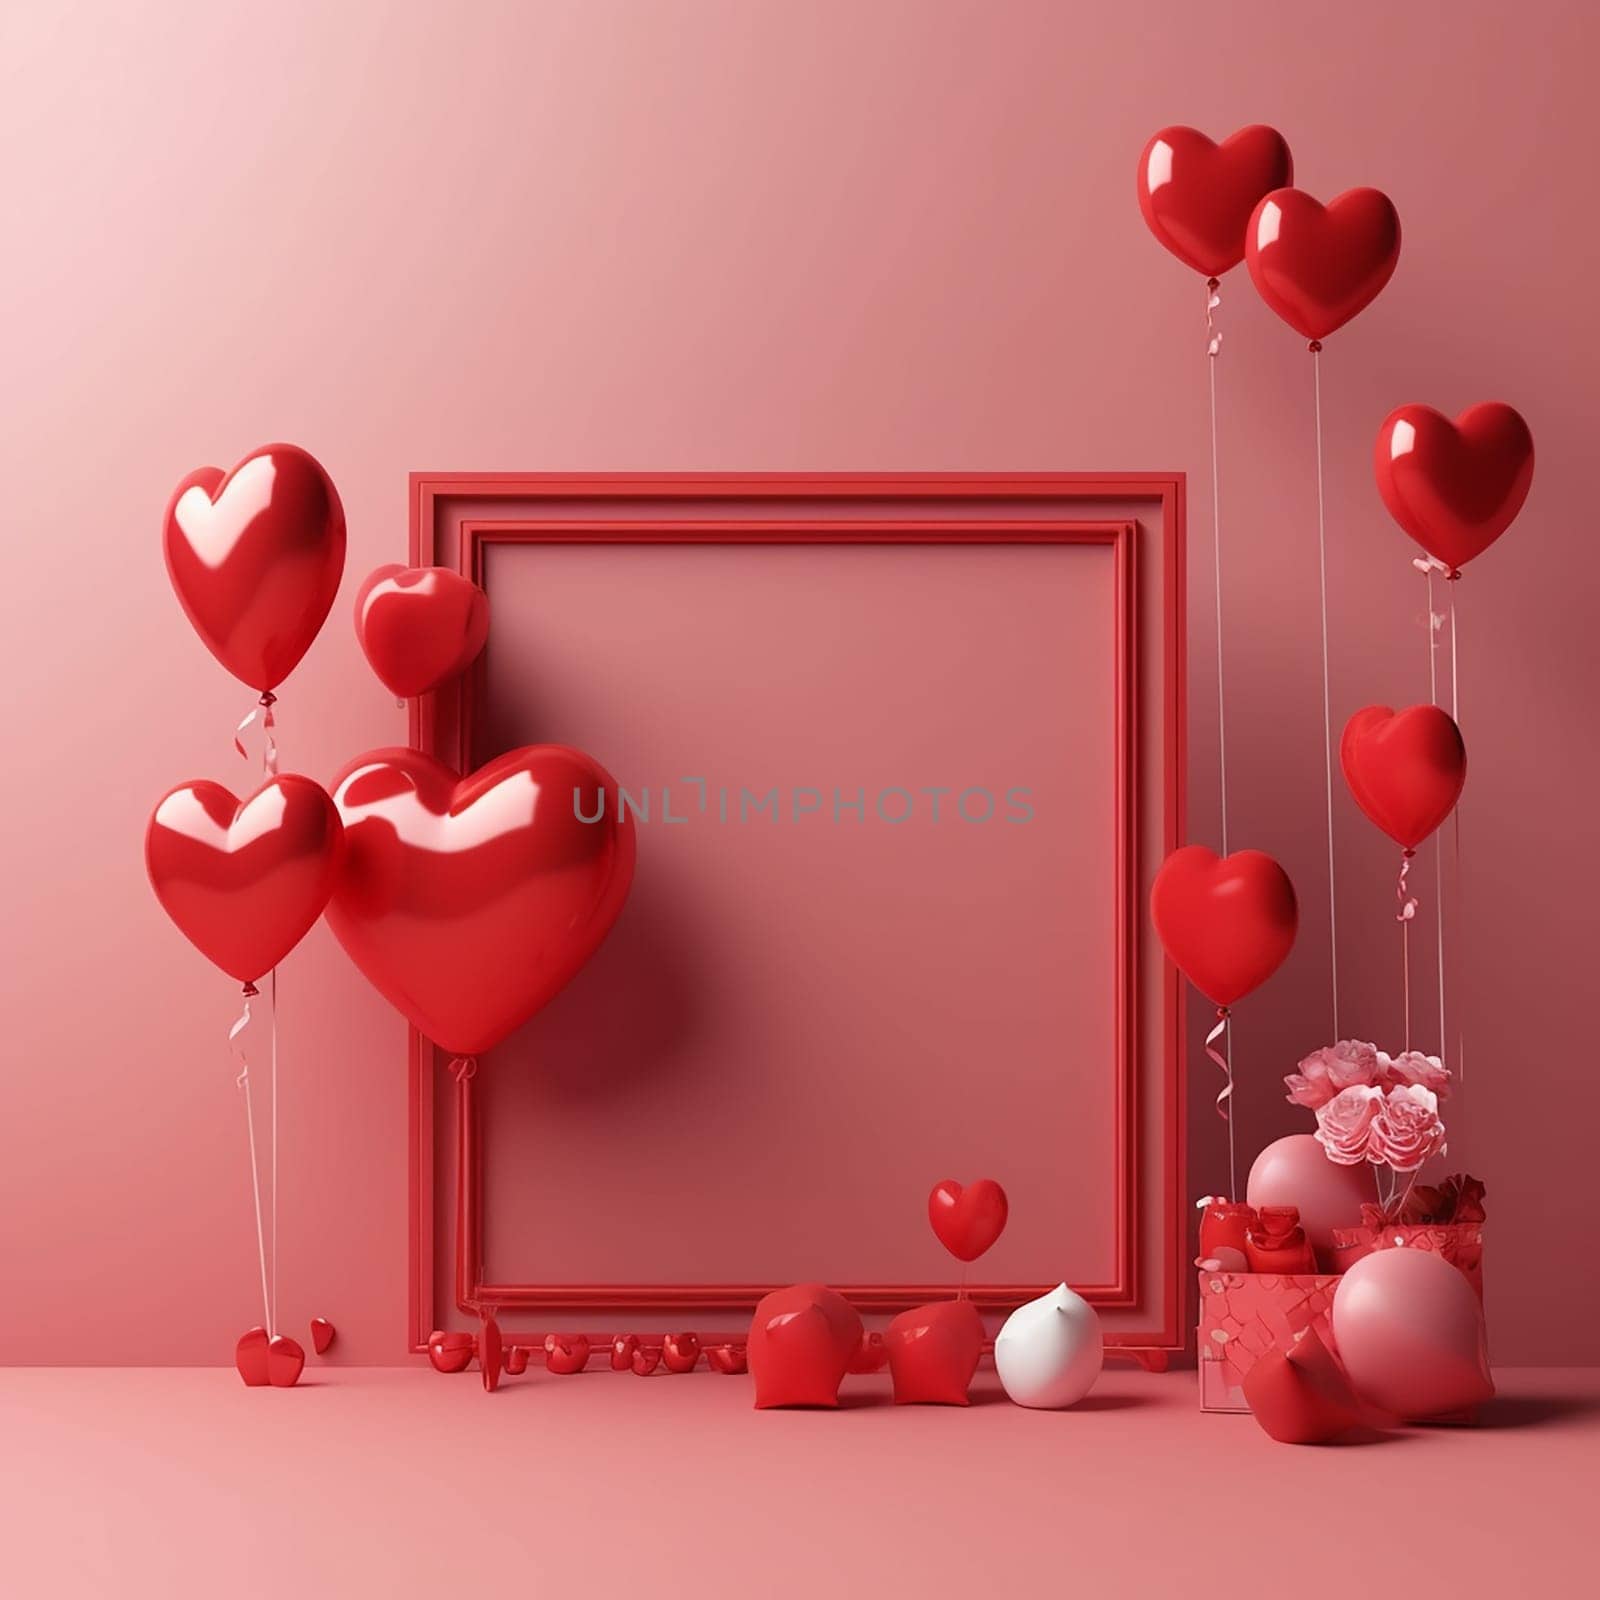 Assortment of red and pink heart-shaped balloons and decorations on a pink background. by Hype2art